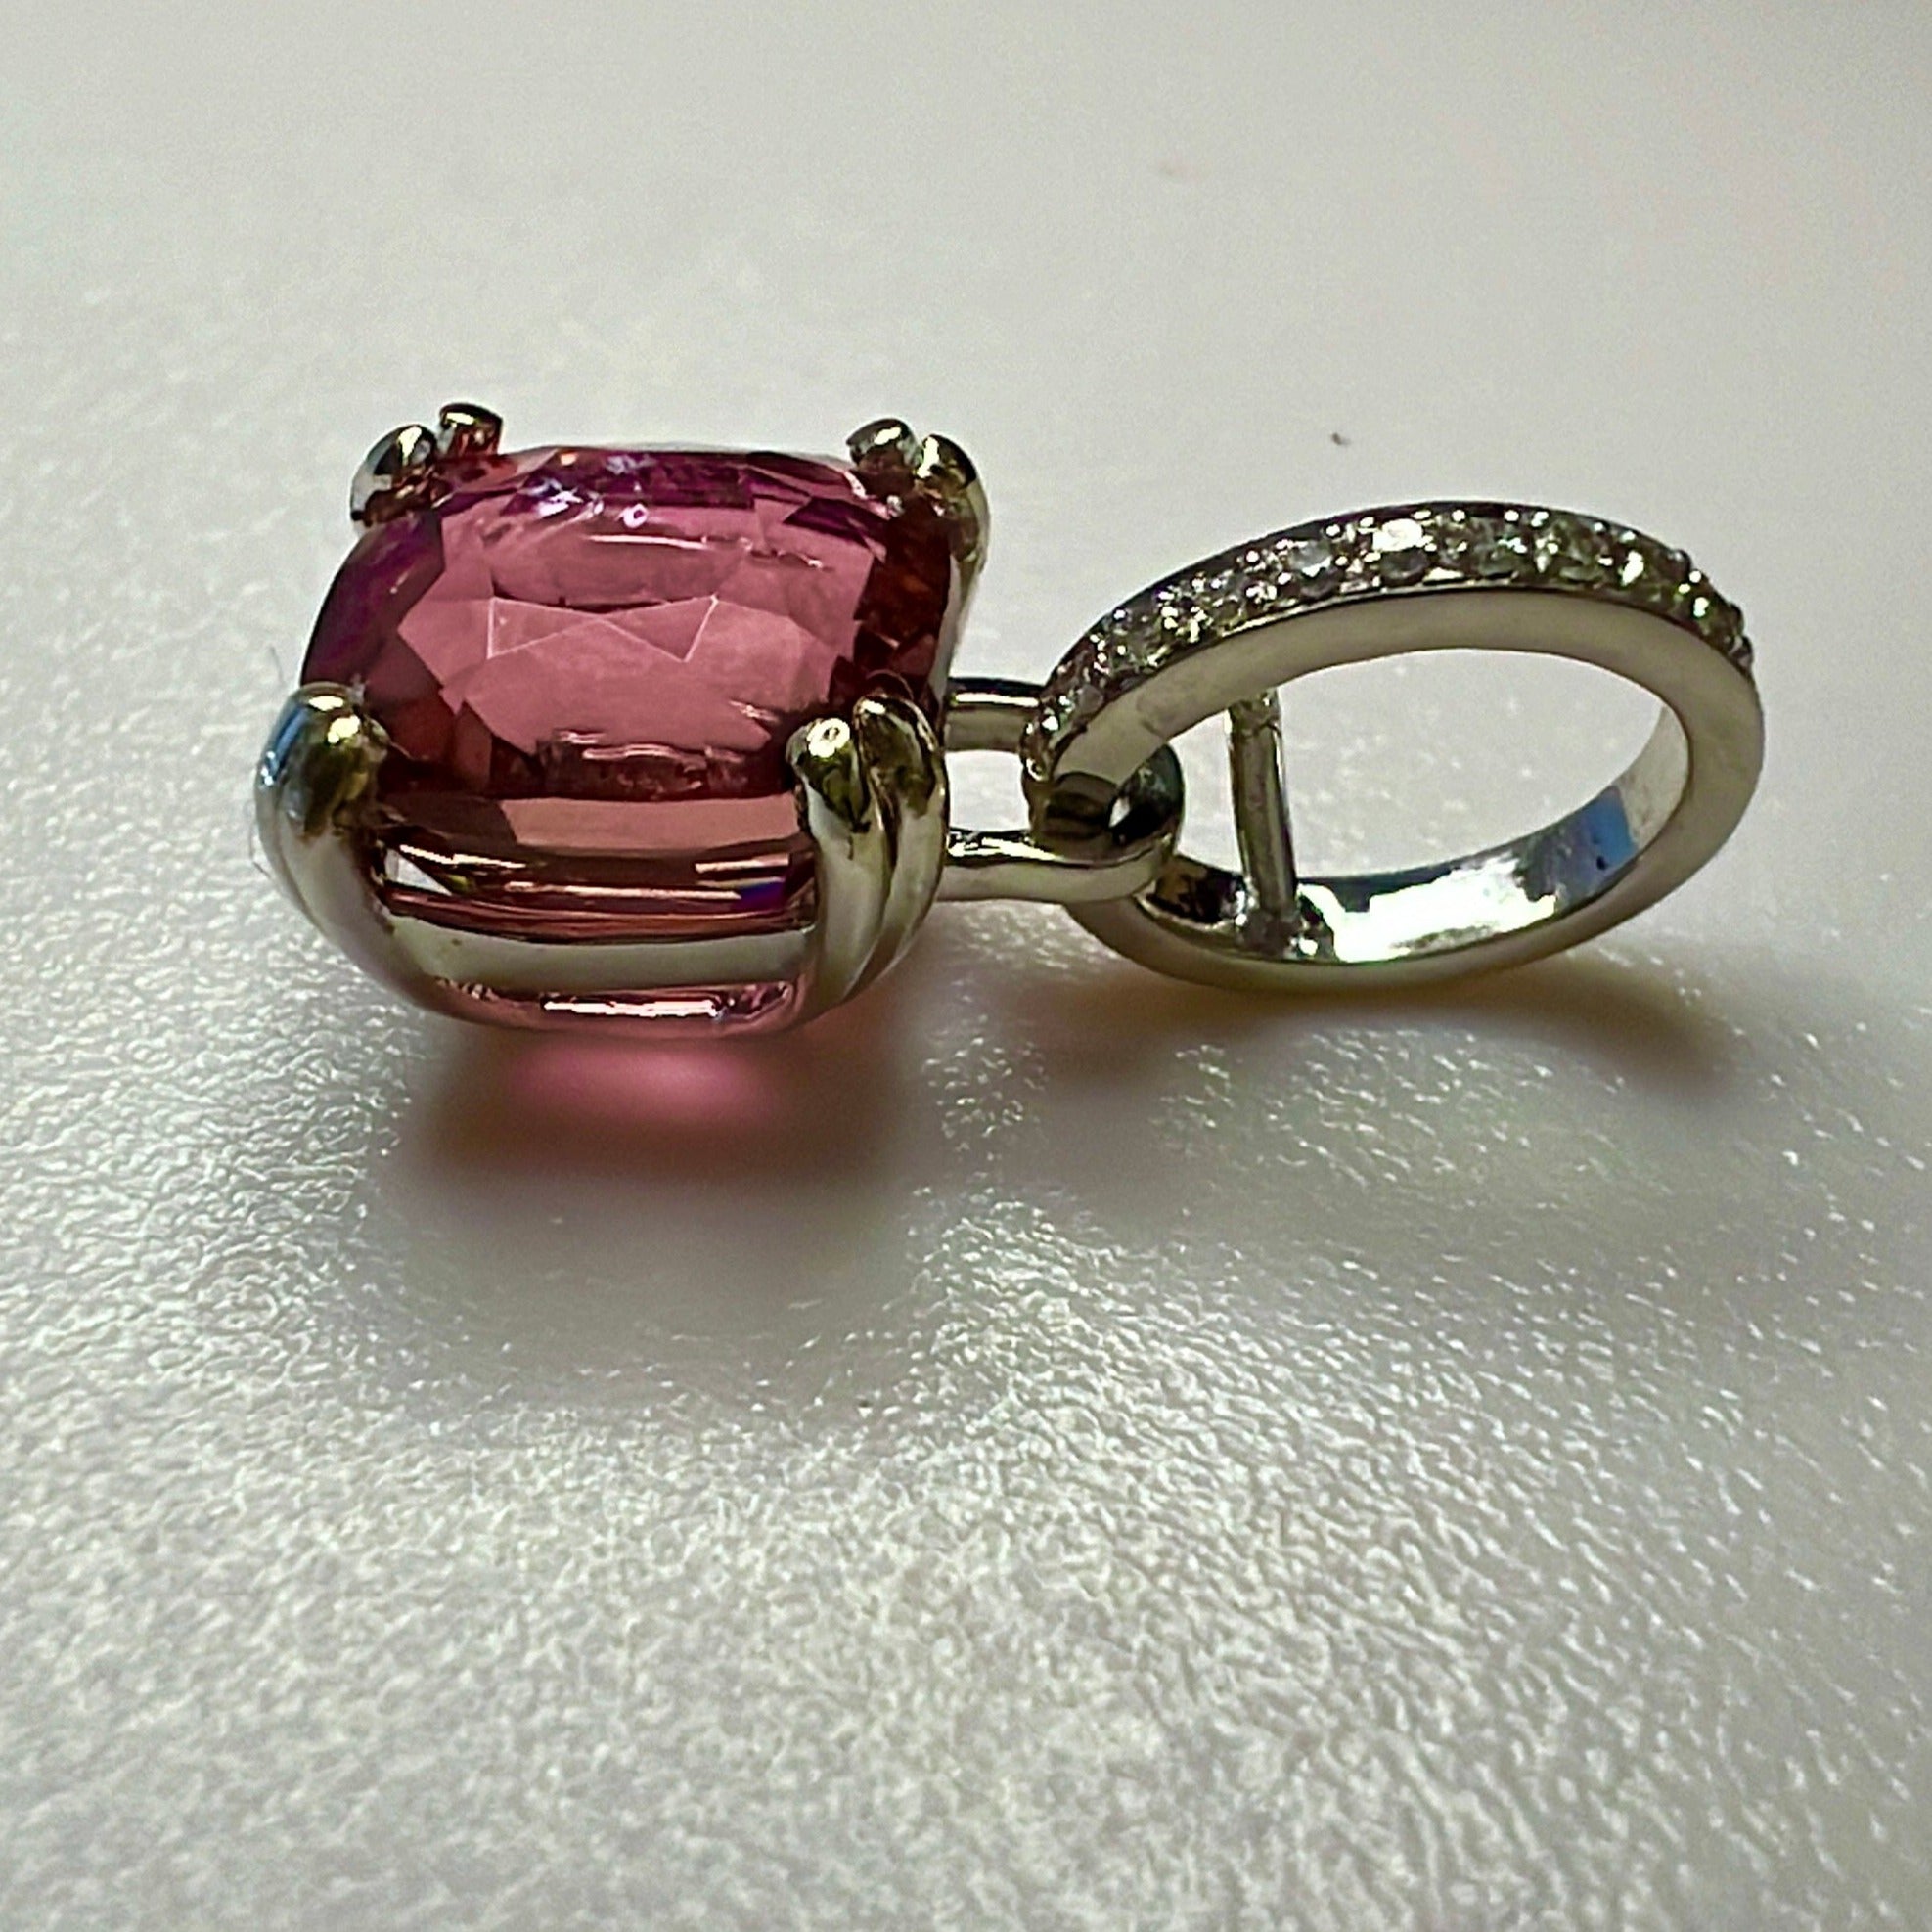 side view of the pink tourmaline pendant charm